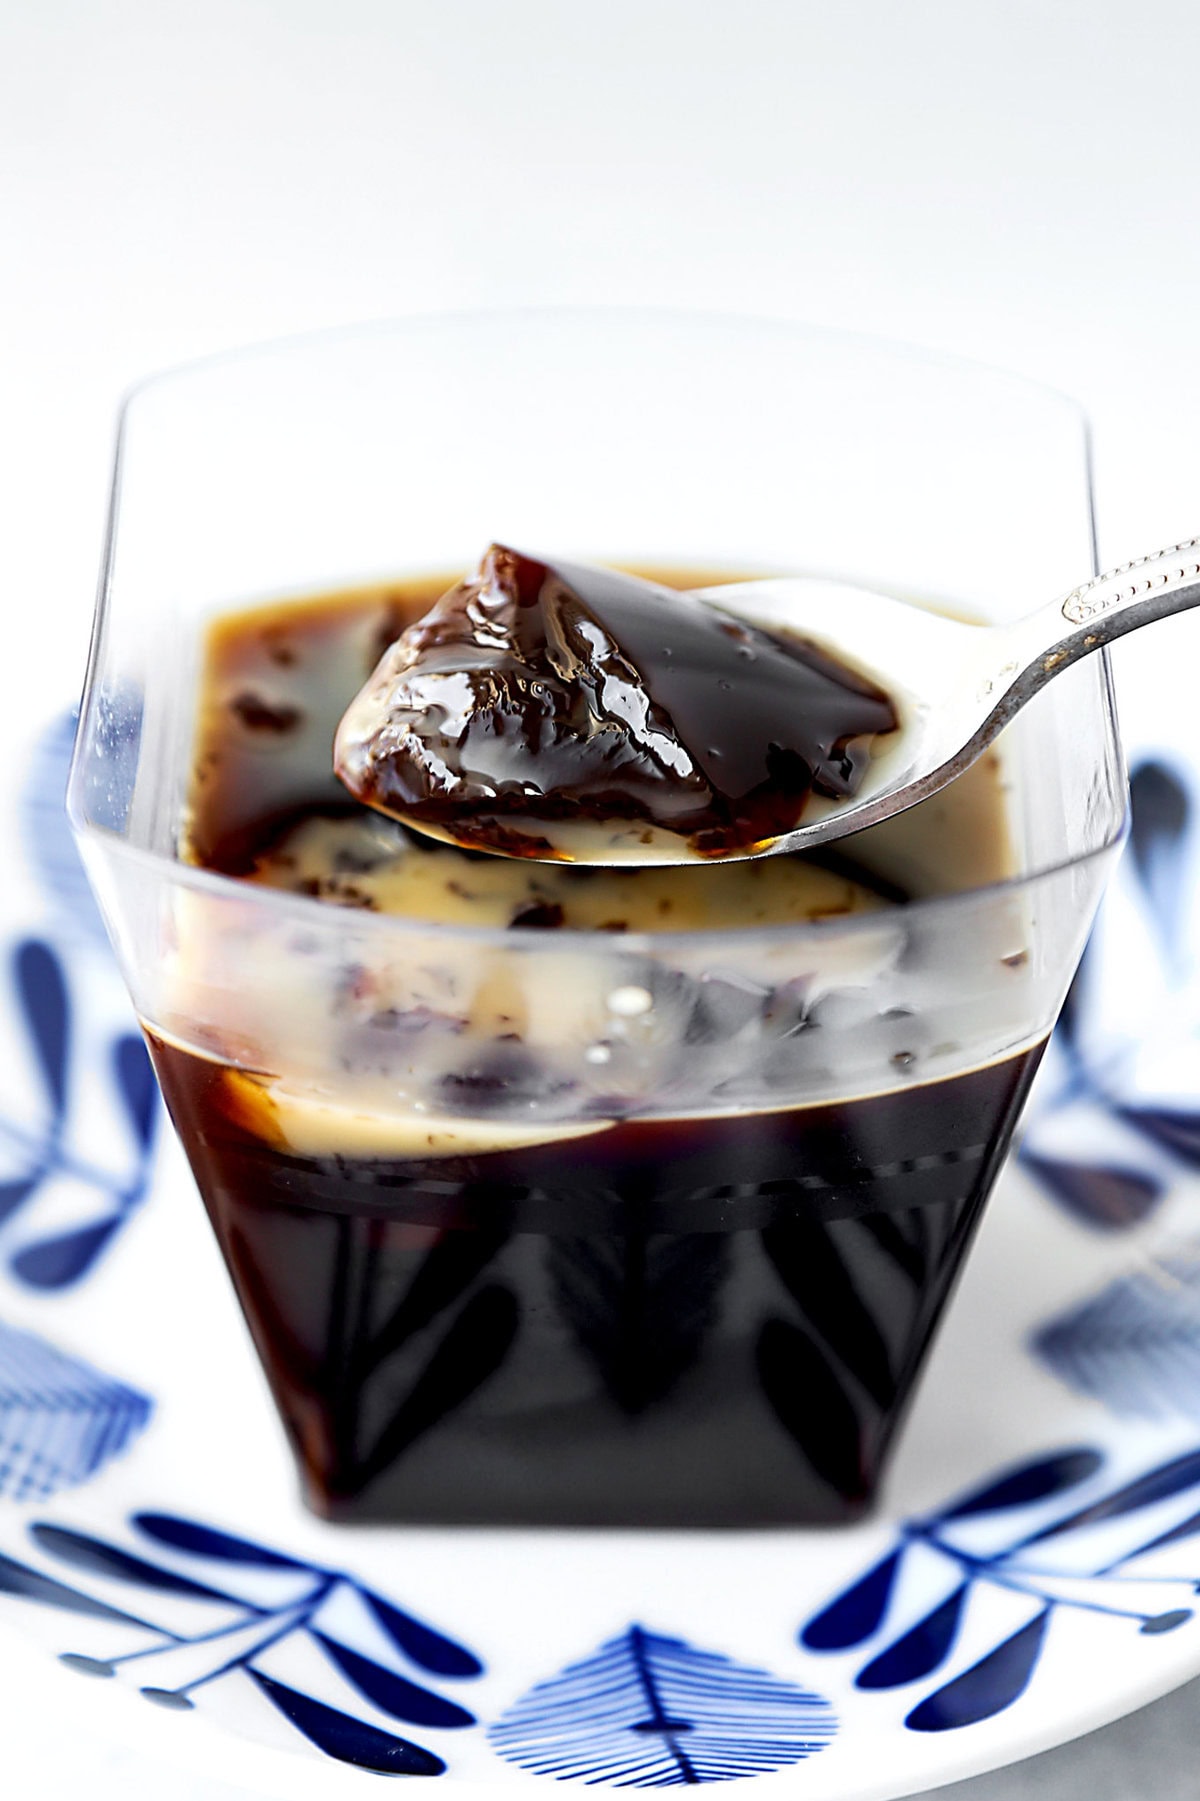 How To Make Coffee Jelly Japanese - Coffee As Dessert The History And ...